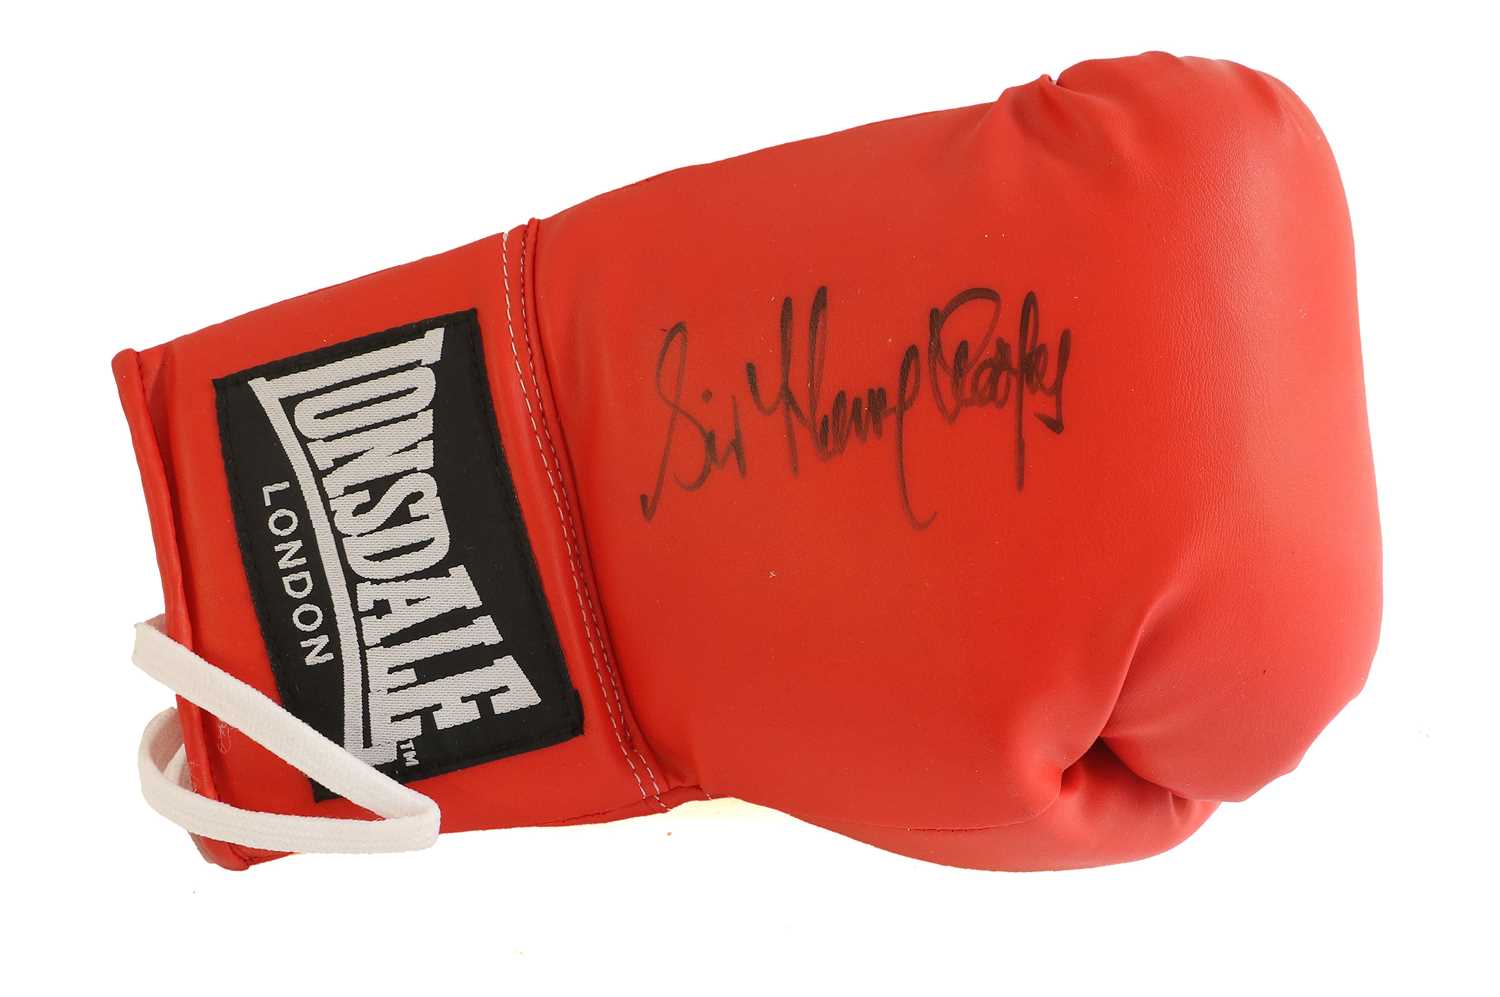 Autographed Boxing Gloves - Image 4 of 6